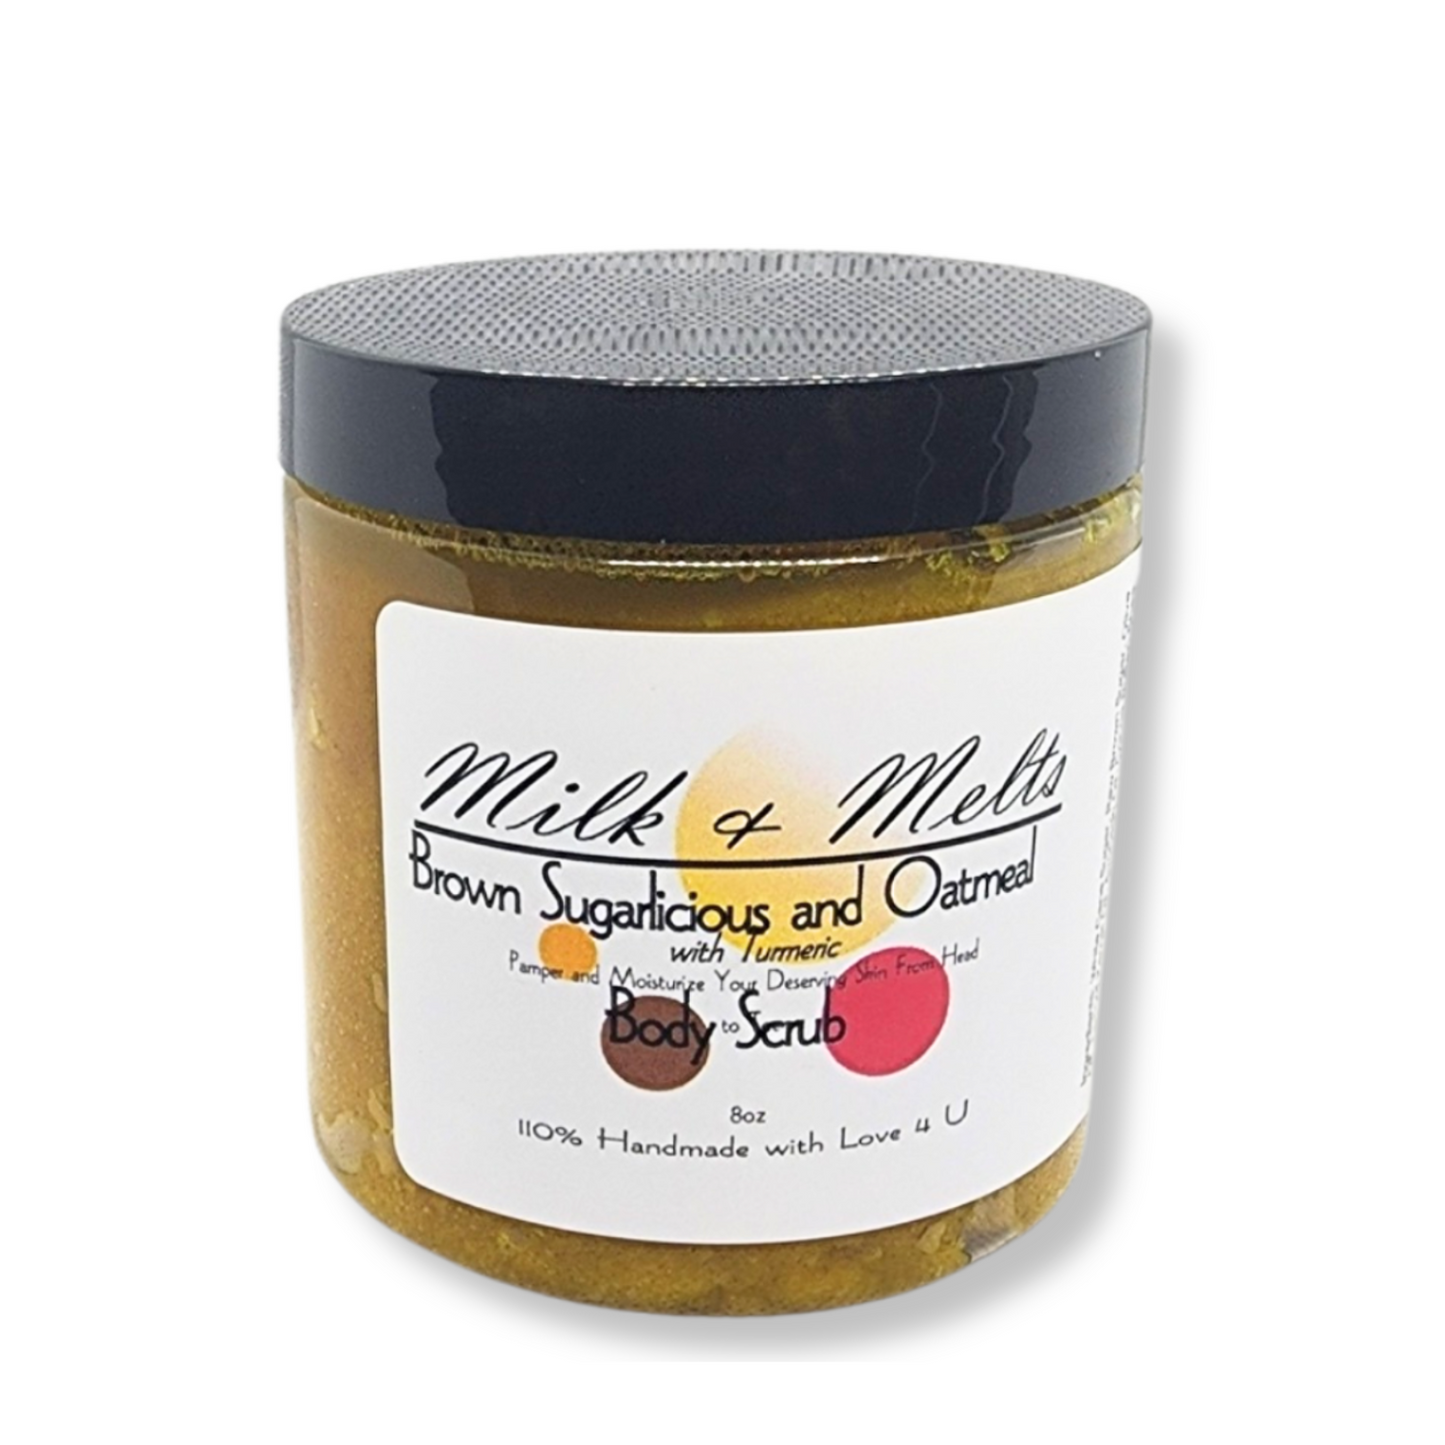 Brown Sugarlicious and Oatmeal w Turmeric Body Scrub (Perfect face and body scrub to assist in skin